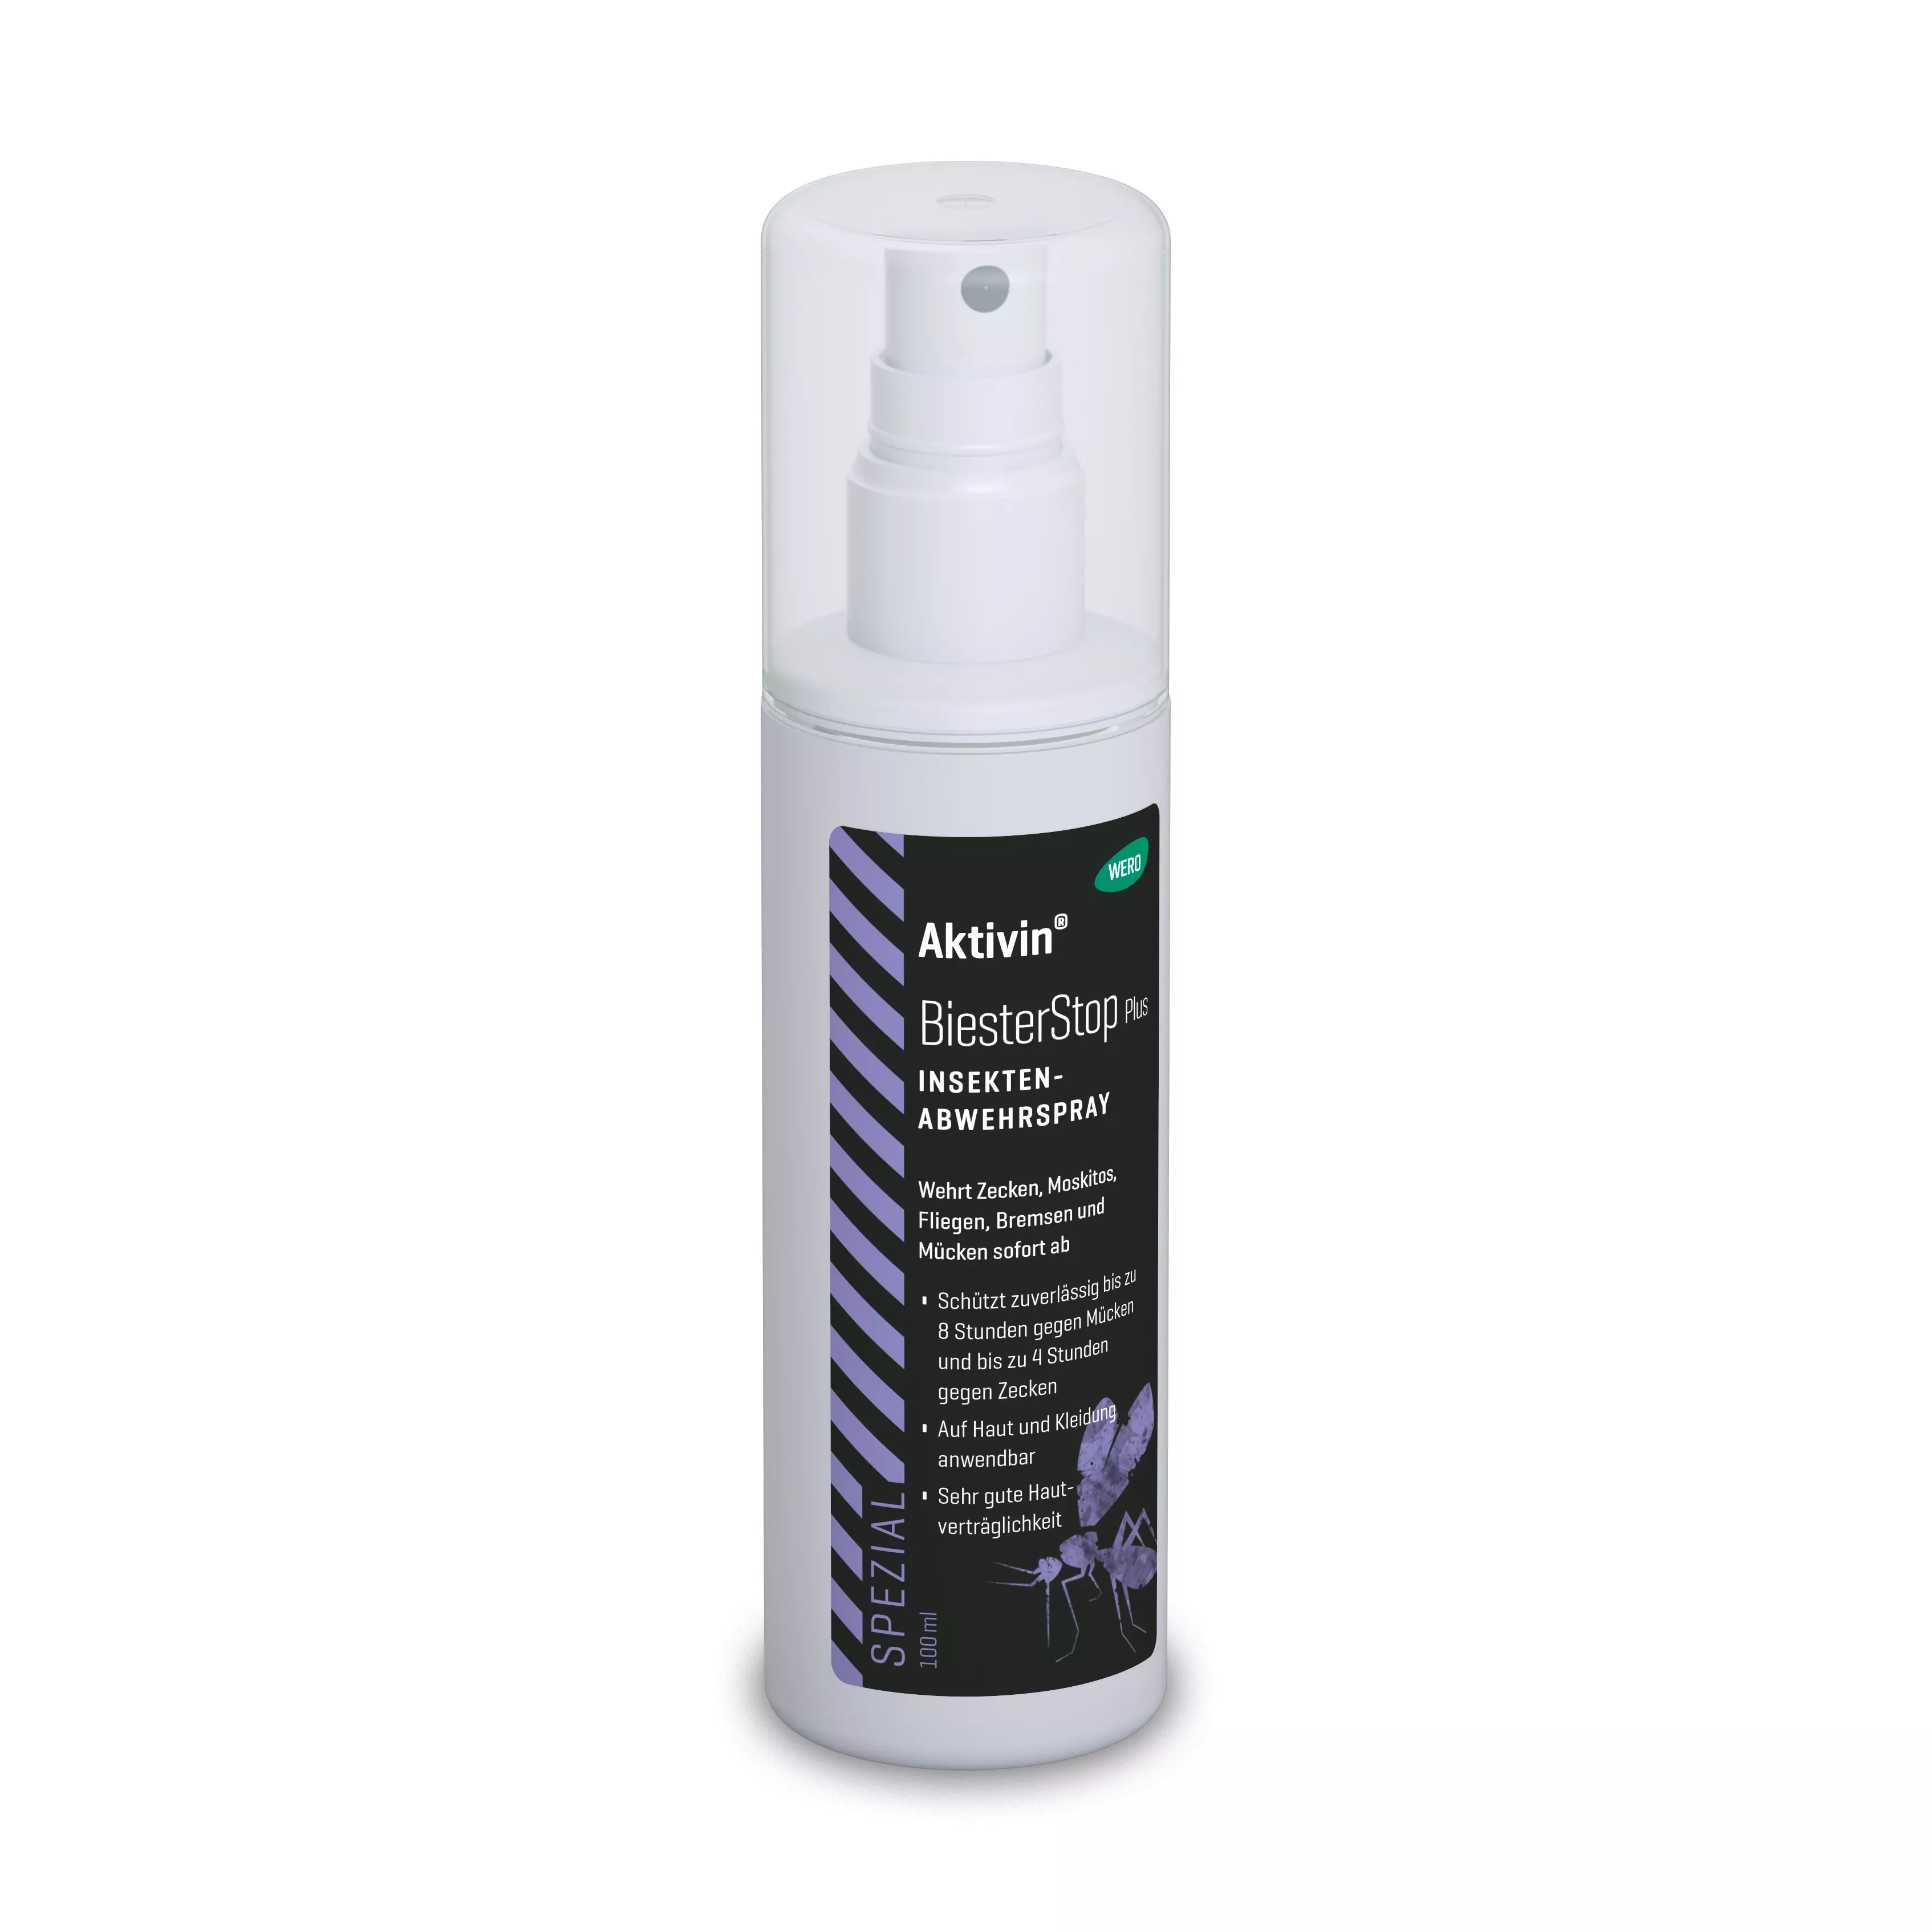 Insect repellent spray Aktivin® BiesterStop Plus, 100 ml